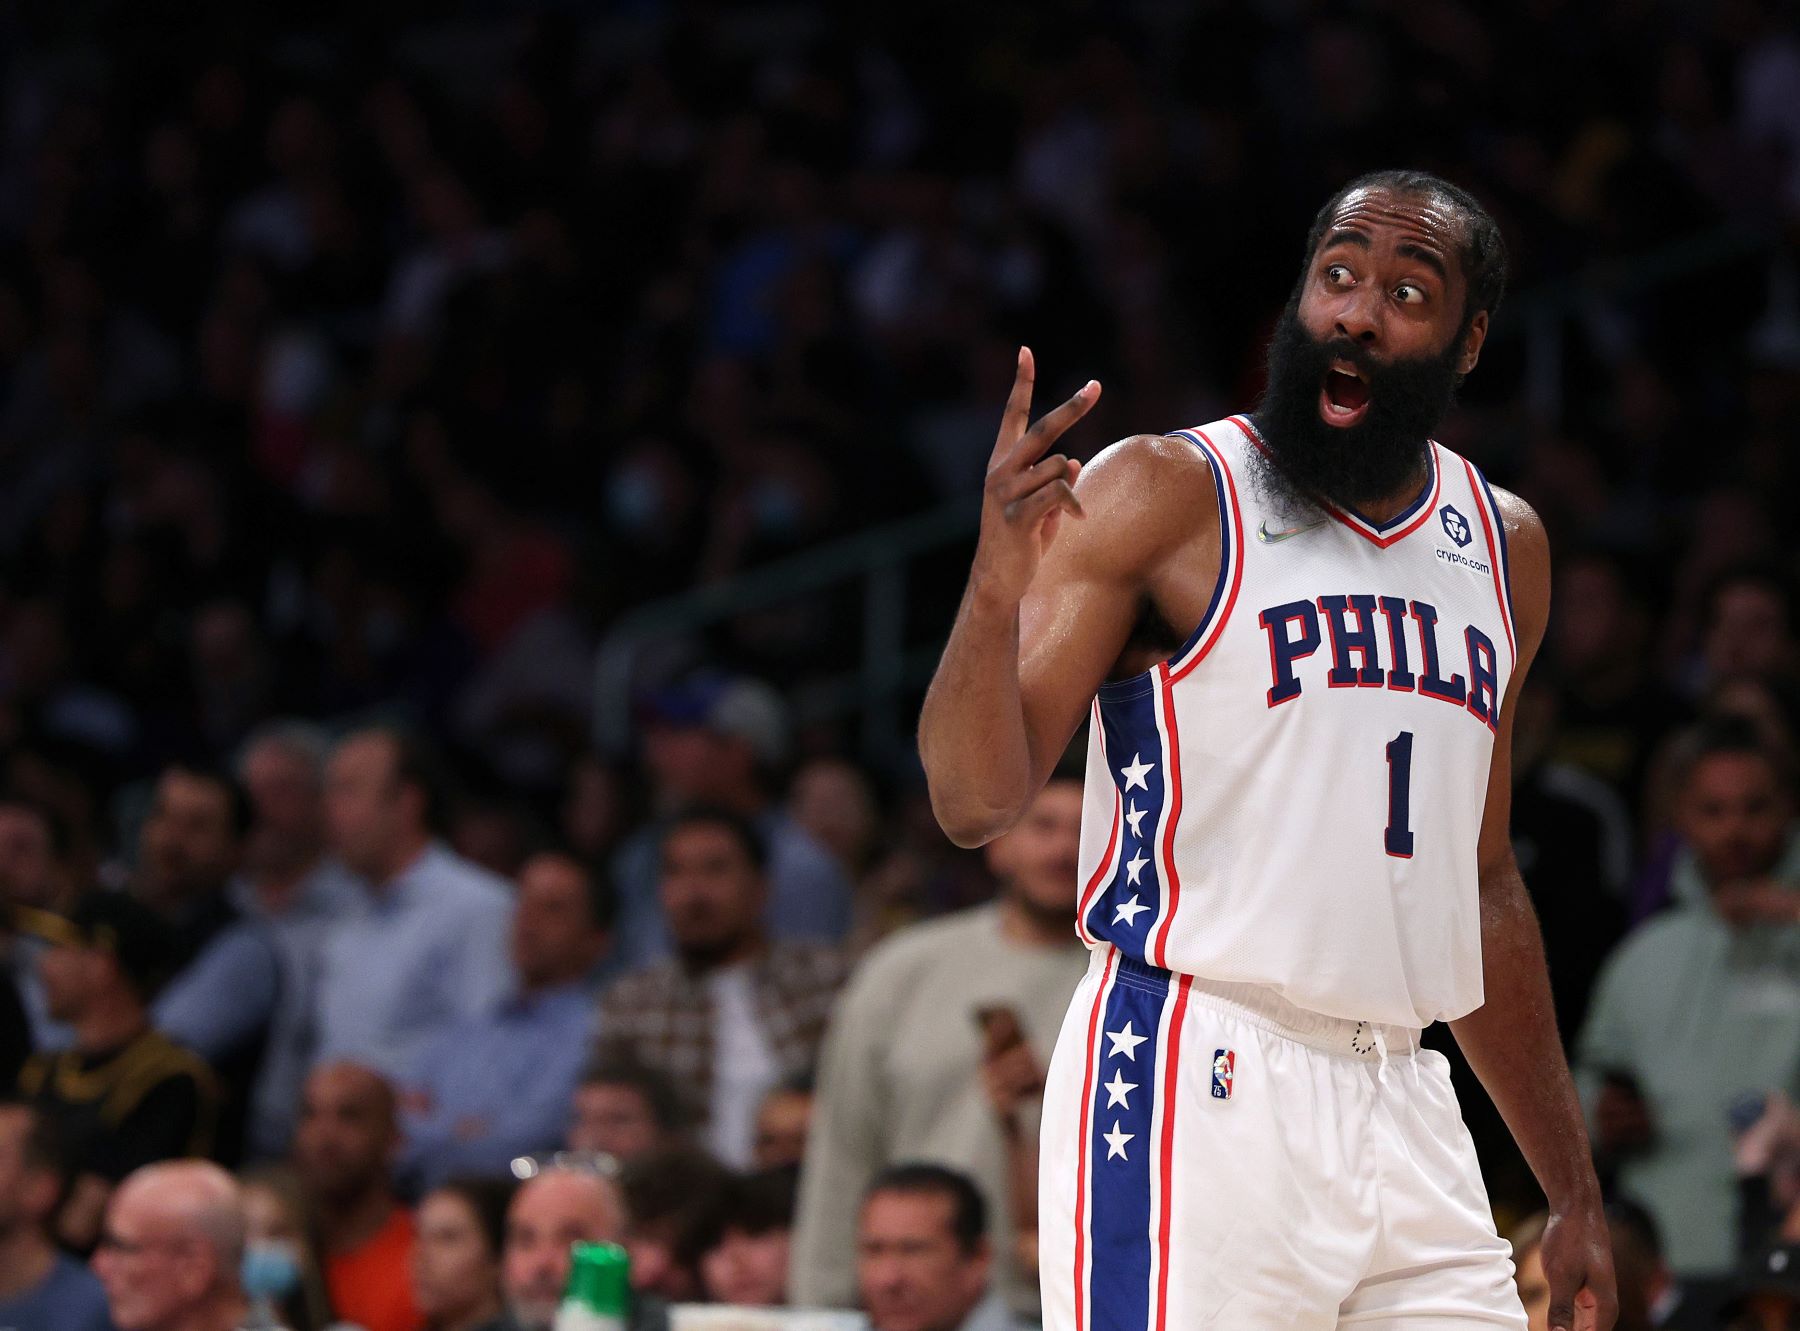 James Harden as #1 of the Philadelphia 76ers NBA team arguing with refs during game against the Los Angeles Lakers